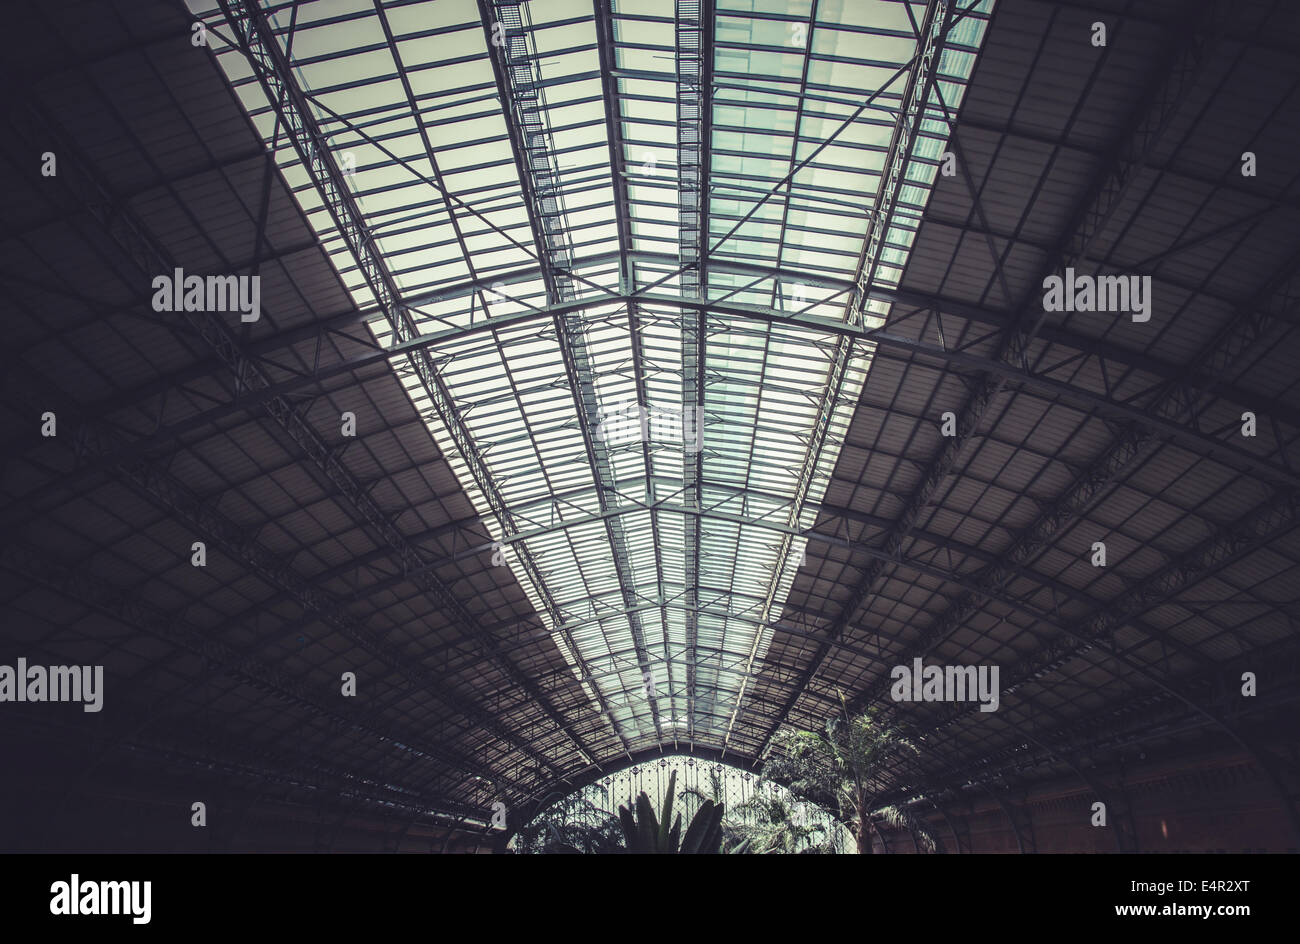 Atocha train station, Image of the city of Madrid, its characteristic architecture Stock Photo